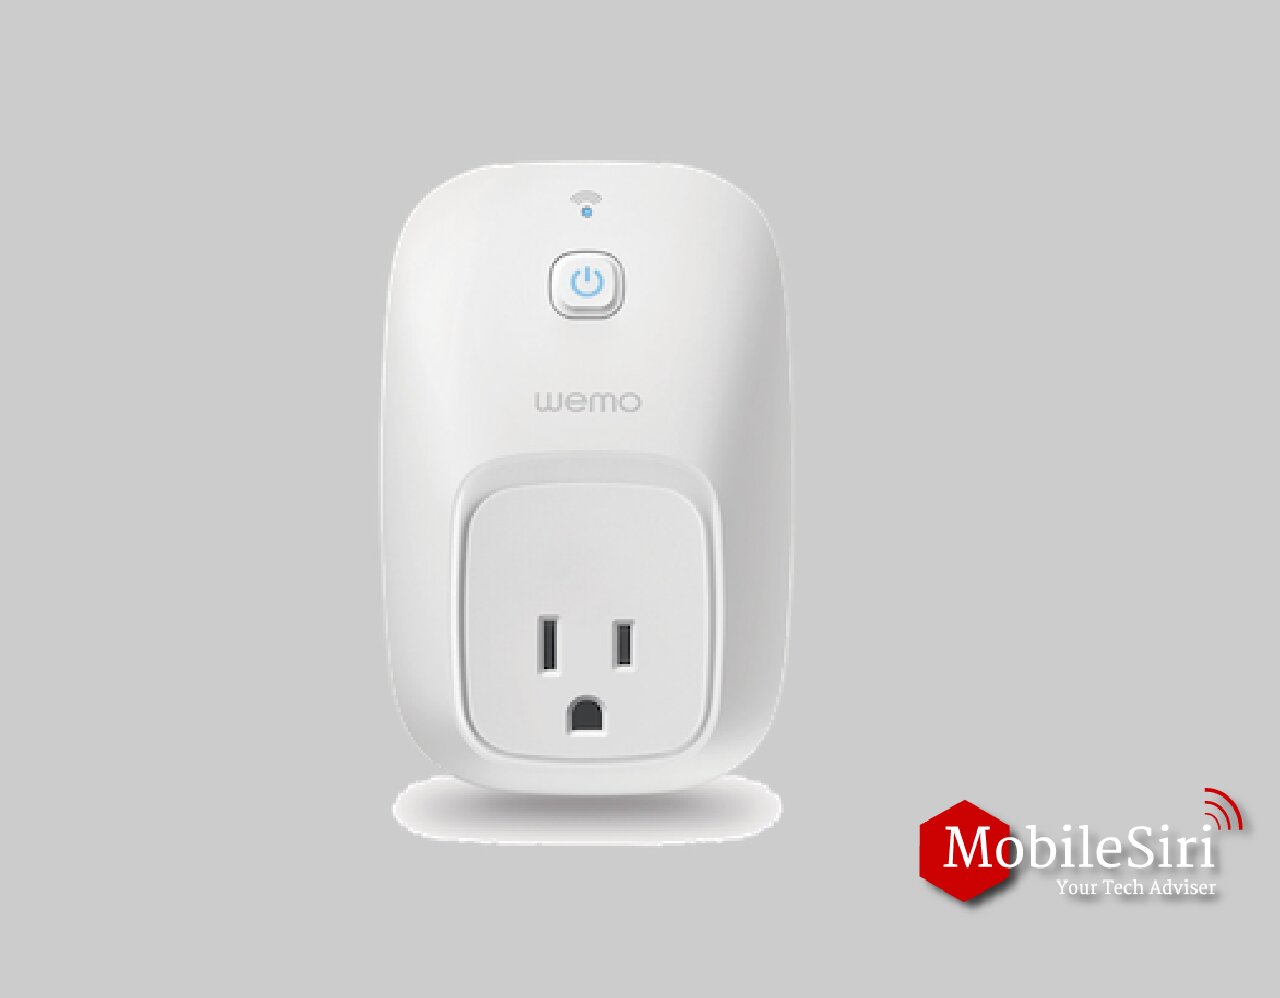 Best Smart Switches and plugs of 2020(WeMo switch smart plug)